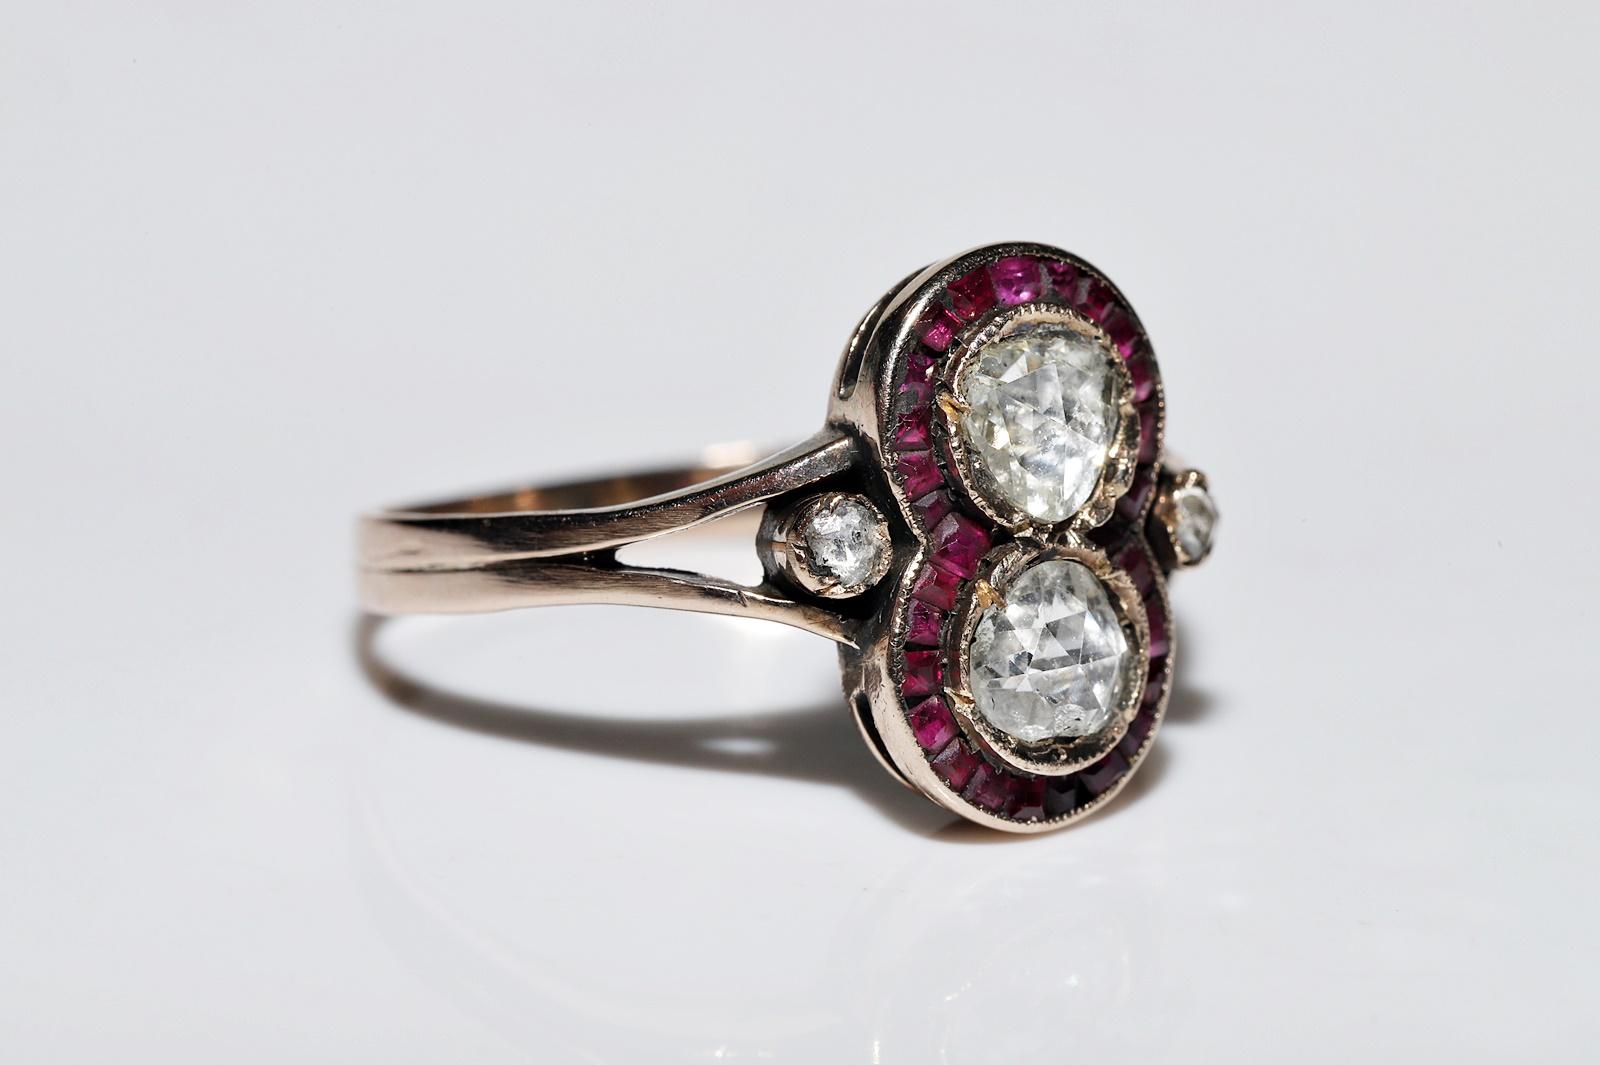 Antique Circa 1900s 10k Gold Natural Rose Cut Diamond And Caliber Ruby Ring For Sale 10